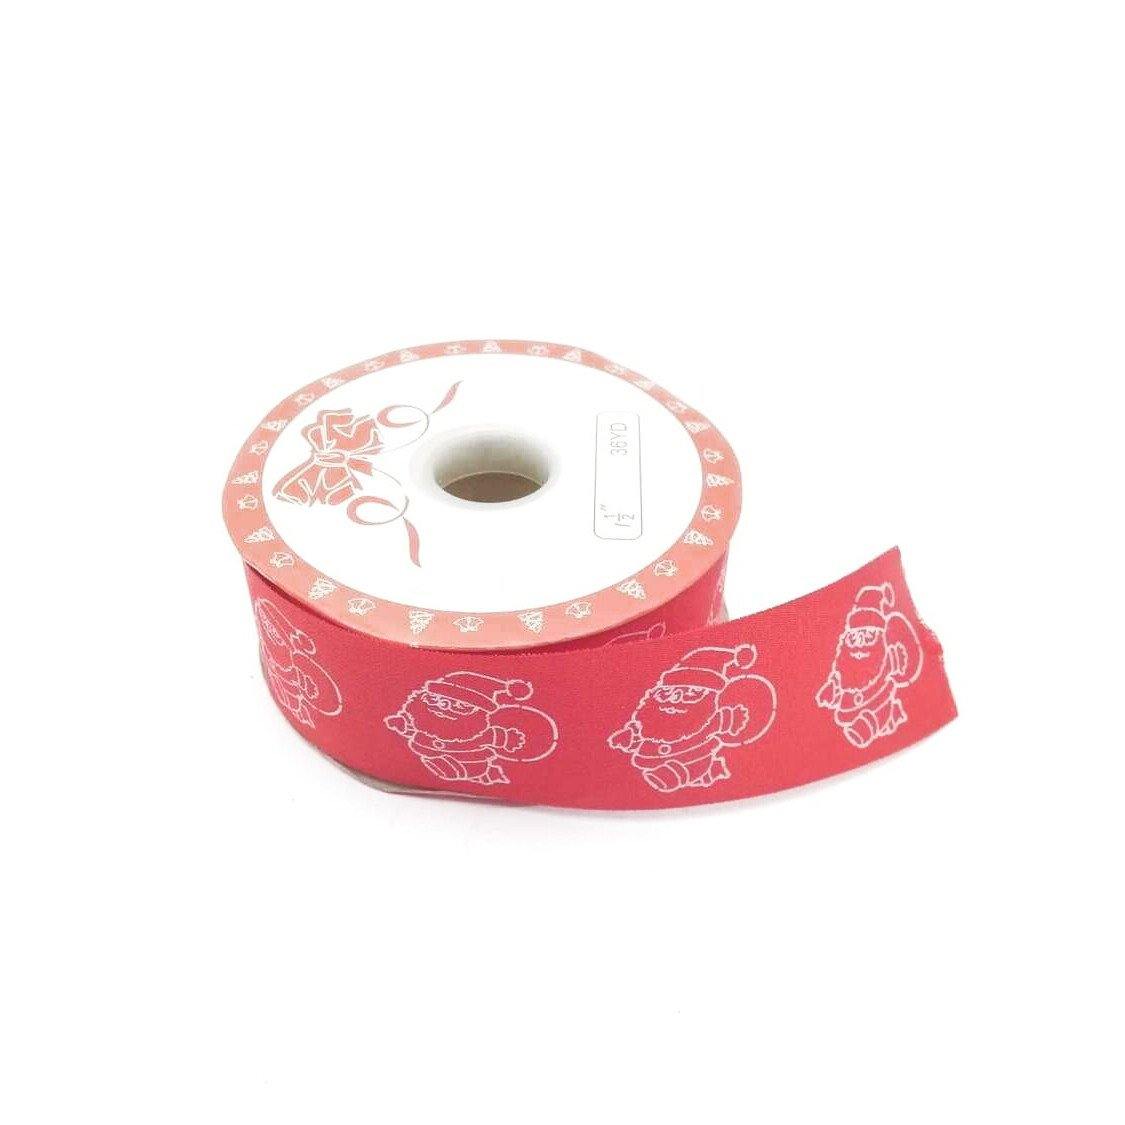 1 1/2" XMAS RED RIBBON #2 1ROLL (36YDS) - Kitchen Convenience: Ingredients & Supplies Delivery